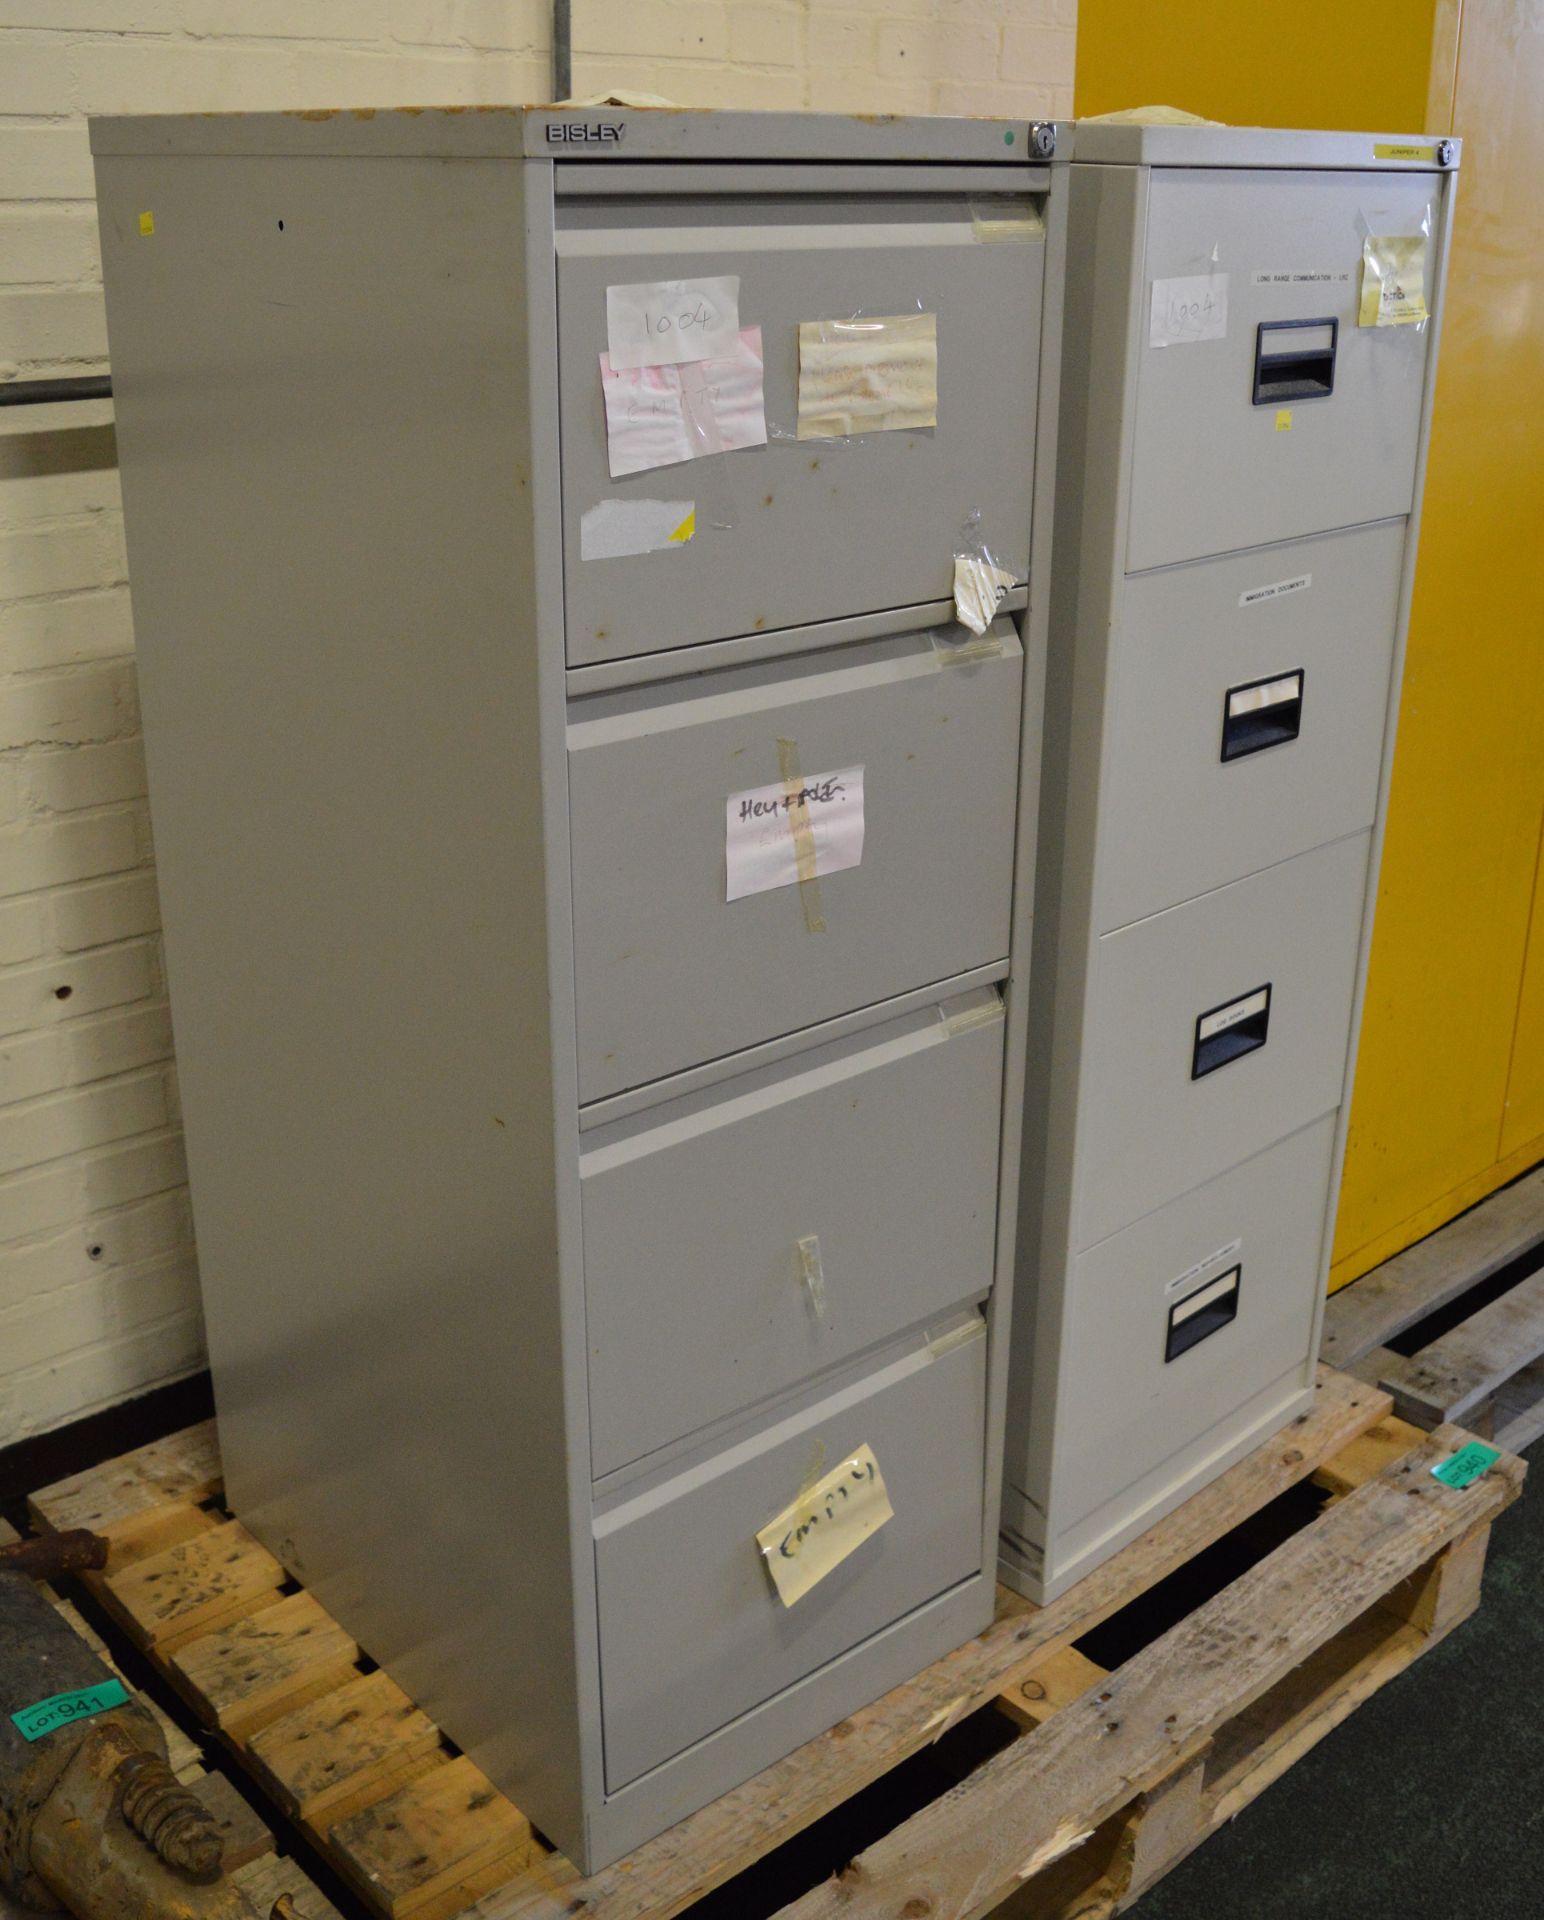 2x 4 Drawer Filing Cabinets L 470 mm x W 620 mm x H 1320mm - combination unknown - Image 2 of 2